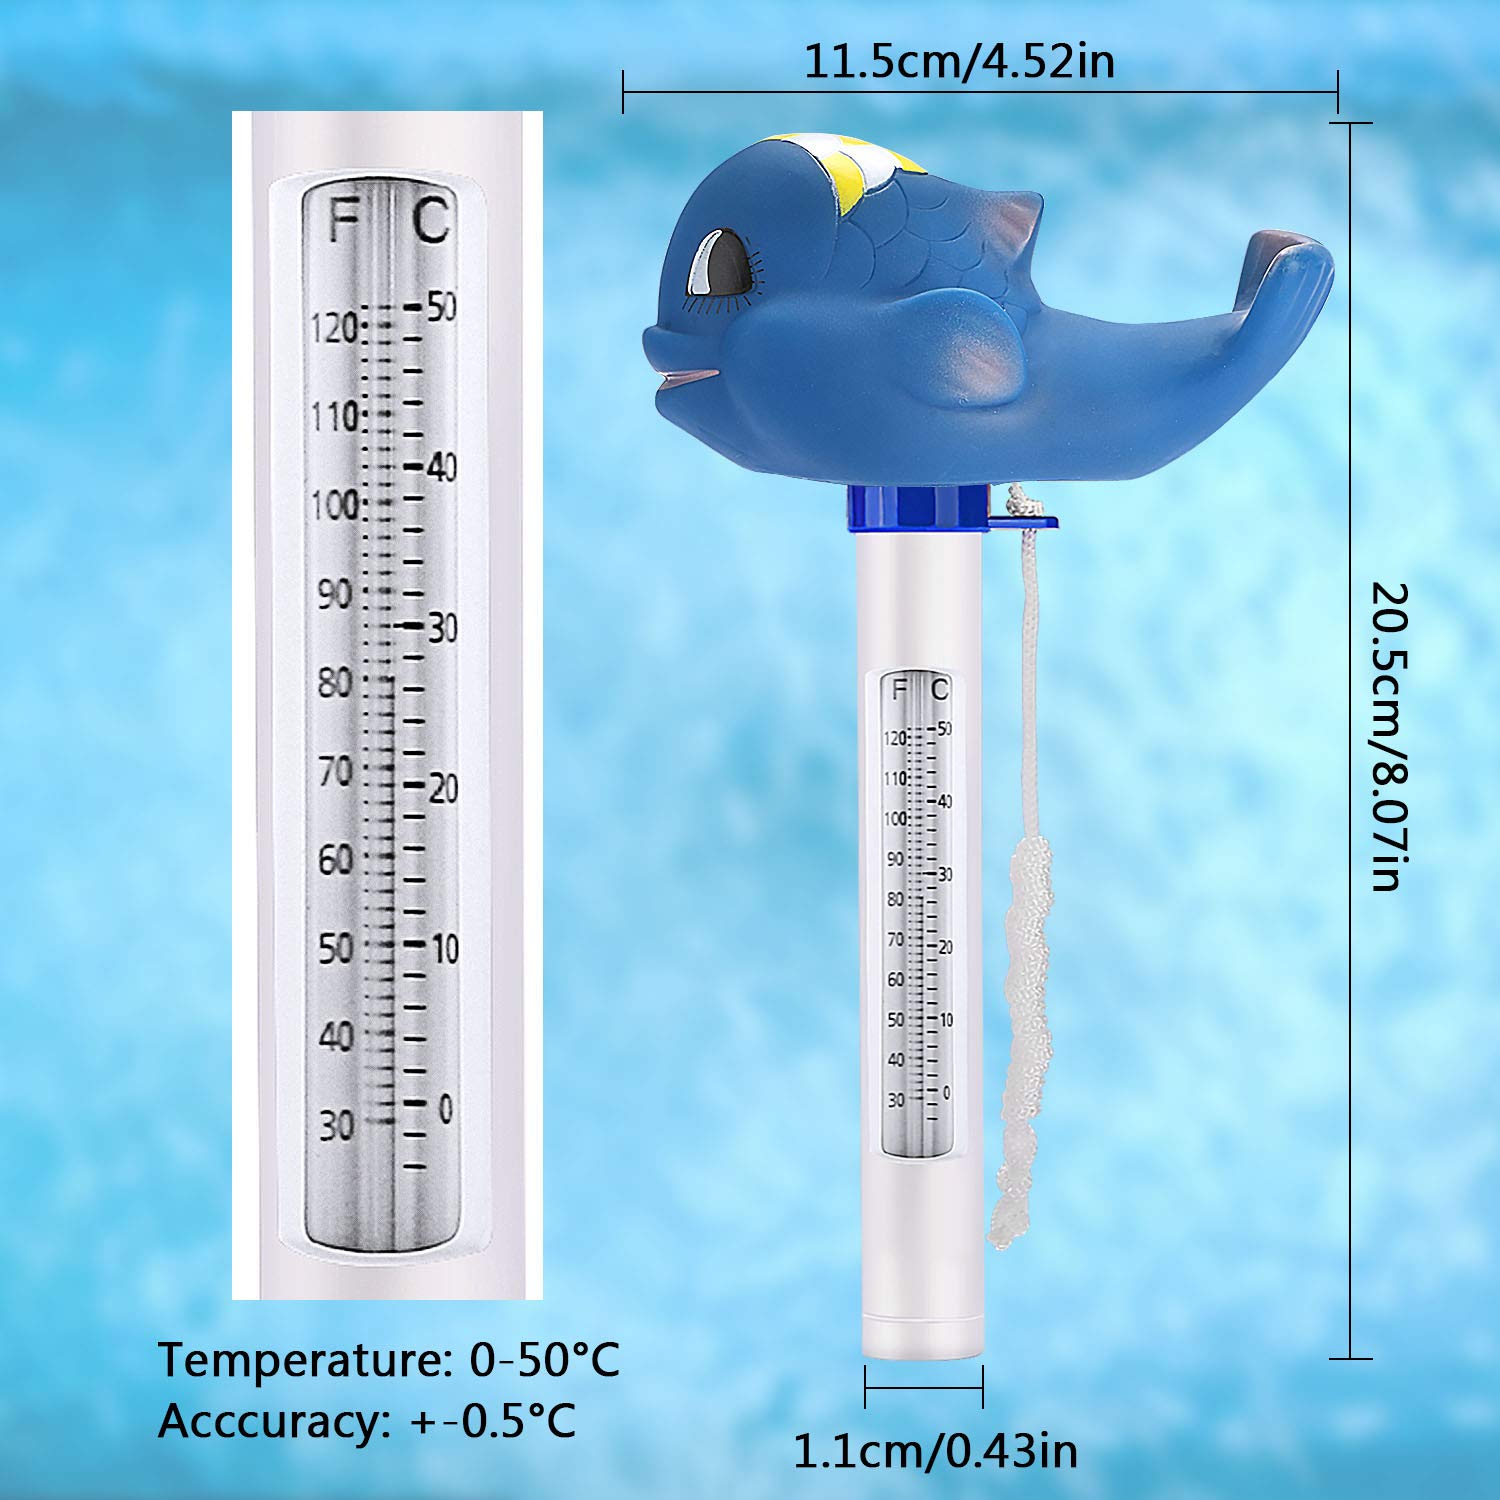 Shatter Resistant -10℃ to 50℃ Spas for Outdoor /& Indoor Swimming Pools Jacuzzis /& Aquariums Upgraded Version isilky Floating Pool Thermometer Hot Tubs